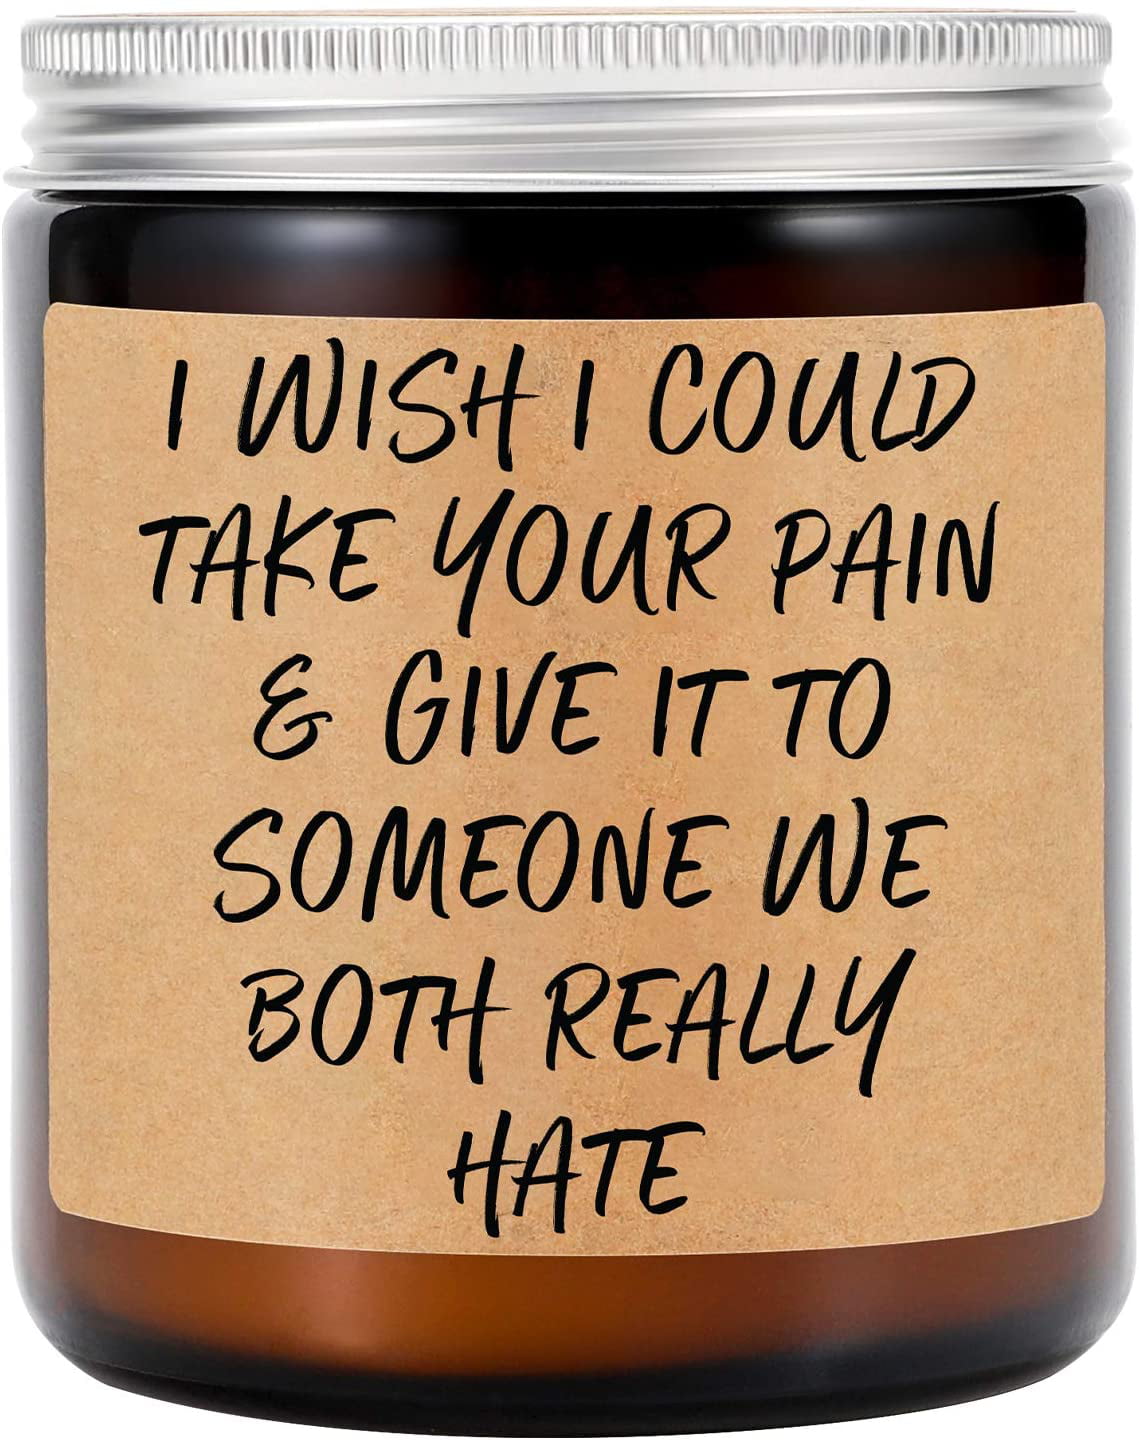 Candle Gift For Best Friend Vanilla Scented Candle For Sister Encouragement Gift For Bestie Motivational Soy Candle In a Jar For Coworker